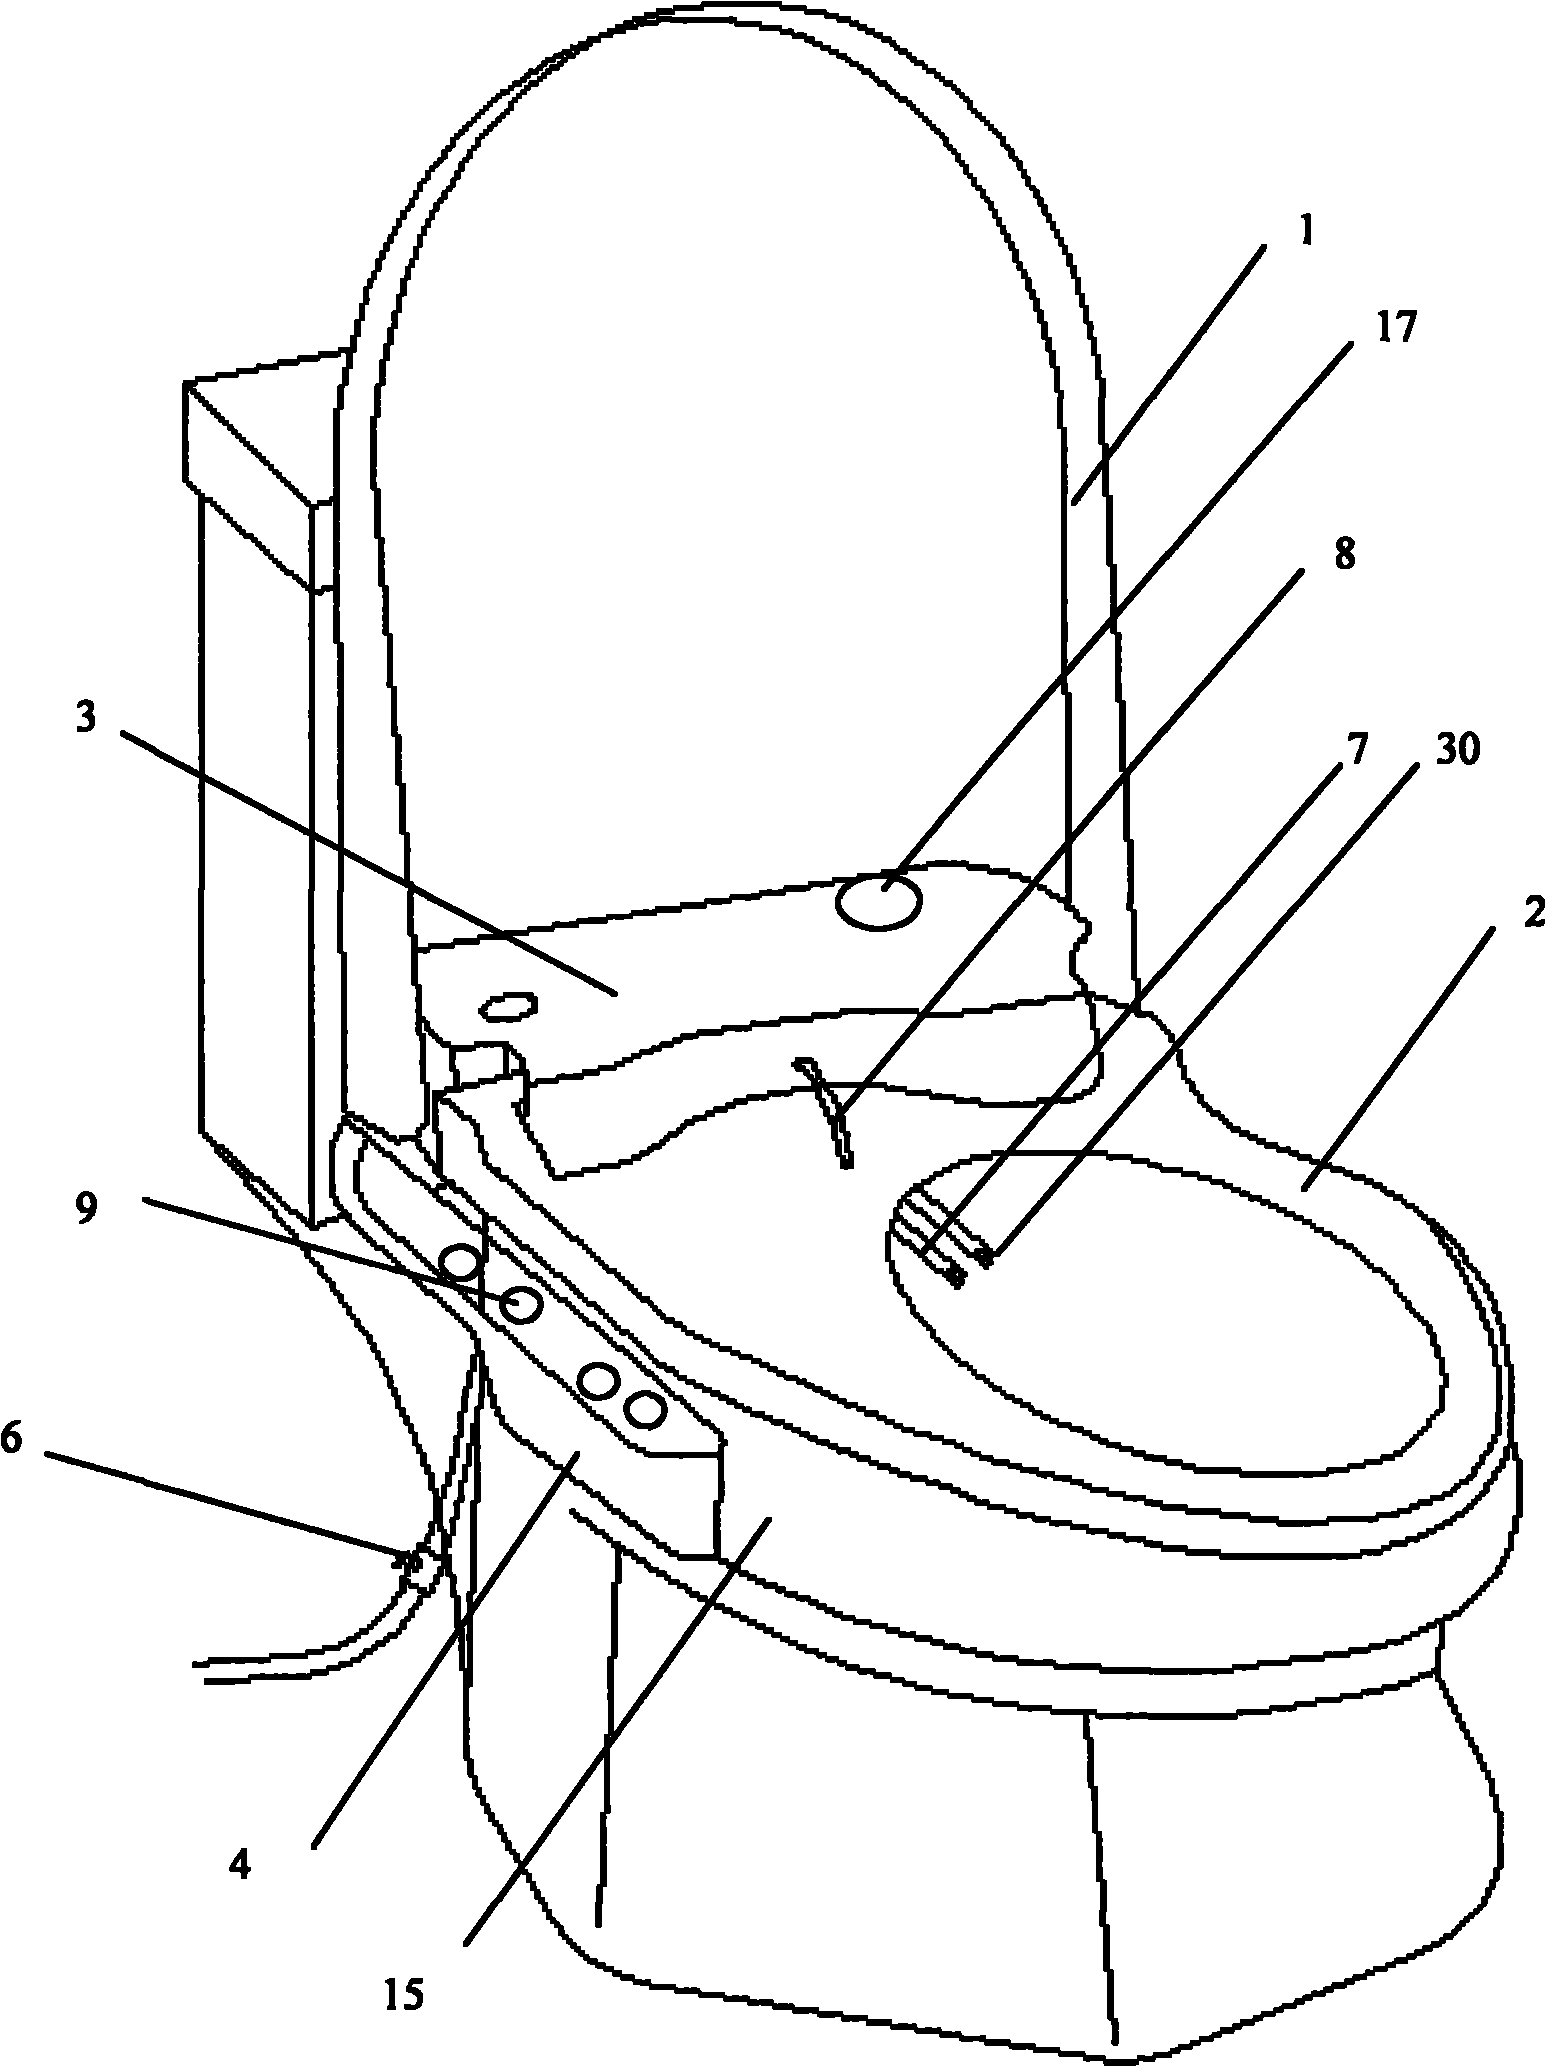 Toilet with flushing and medical treatment functions